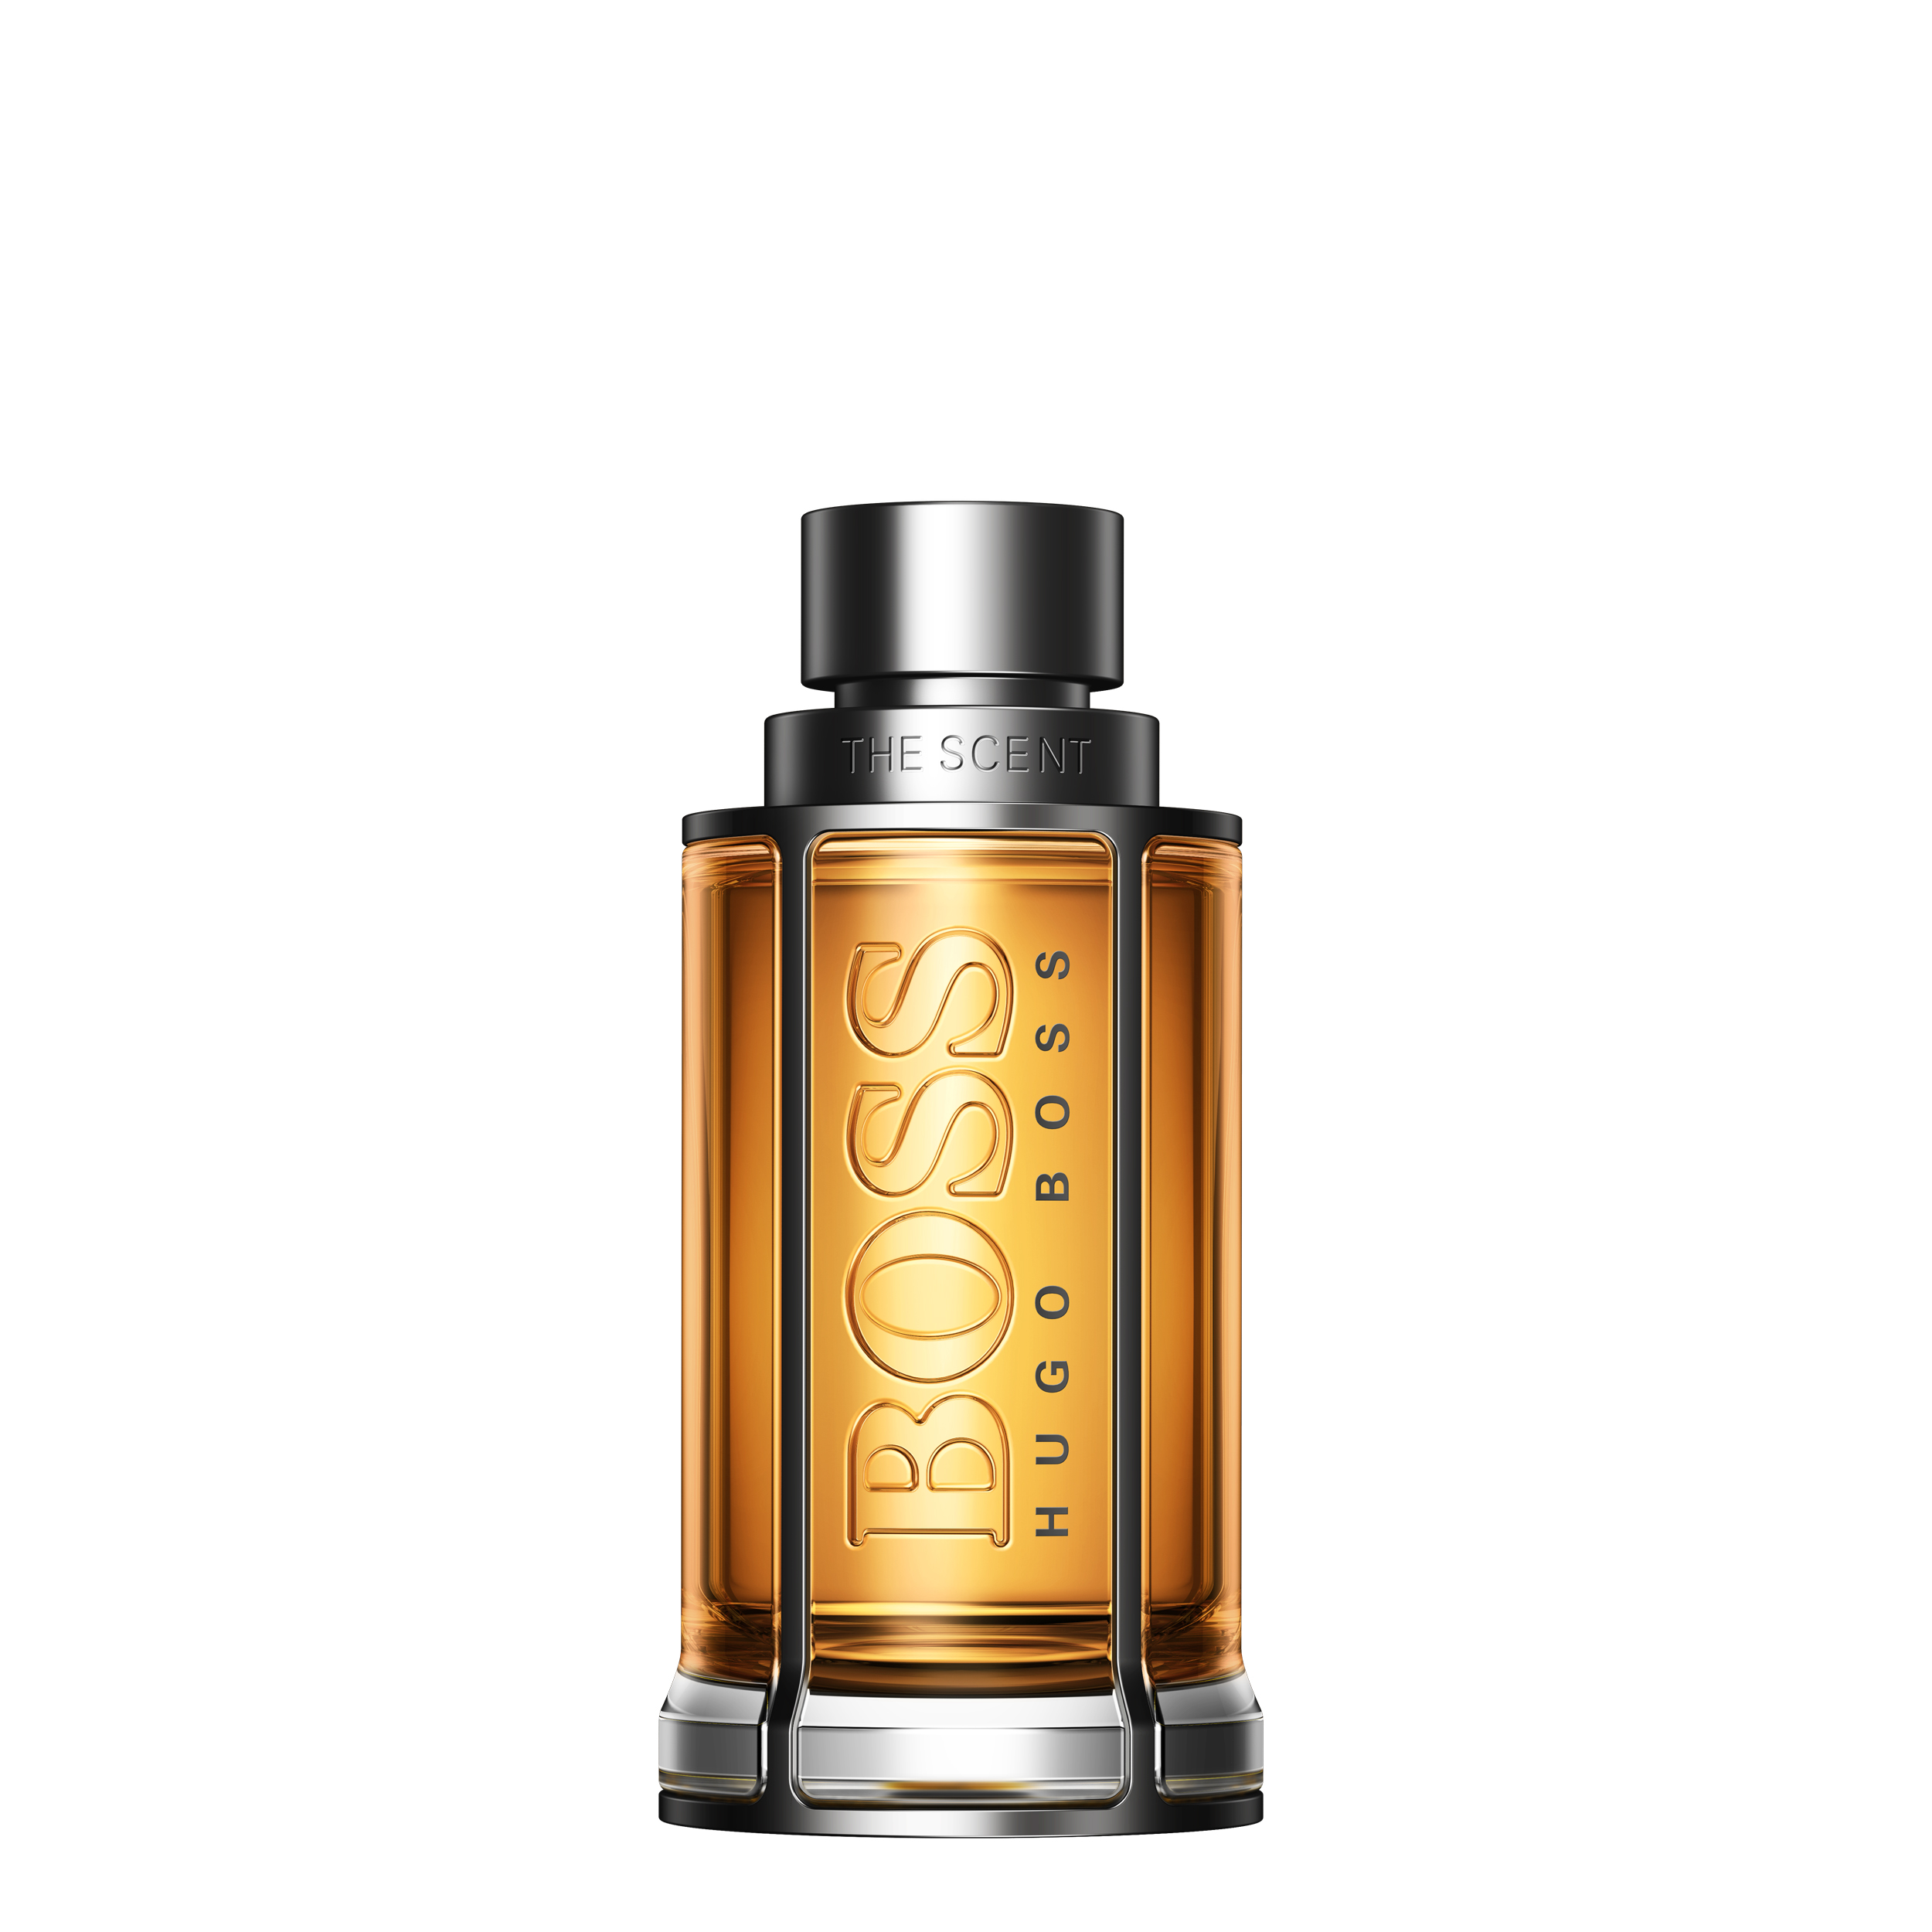  Boss: The Scent 